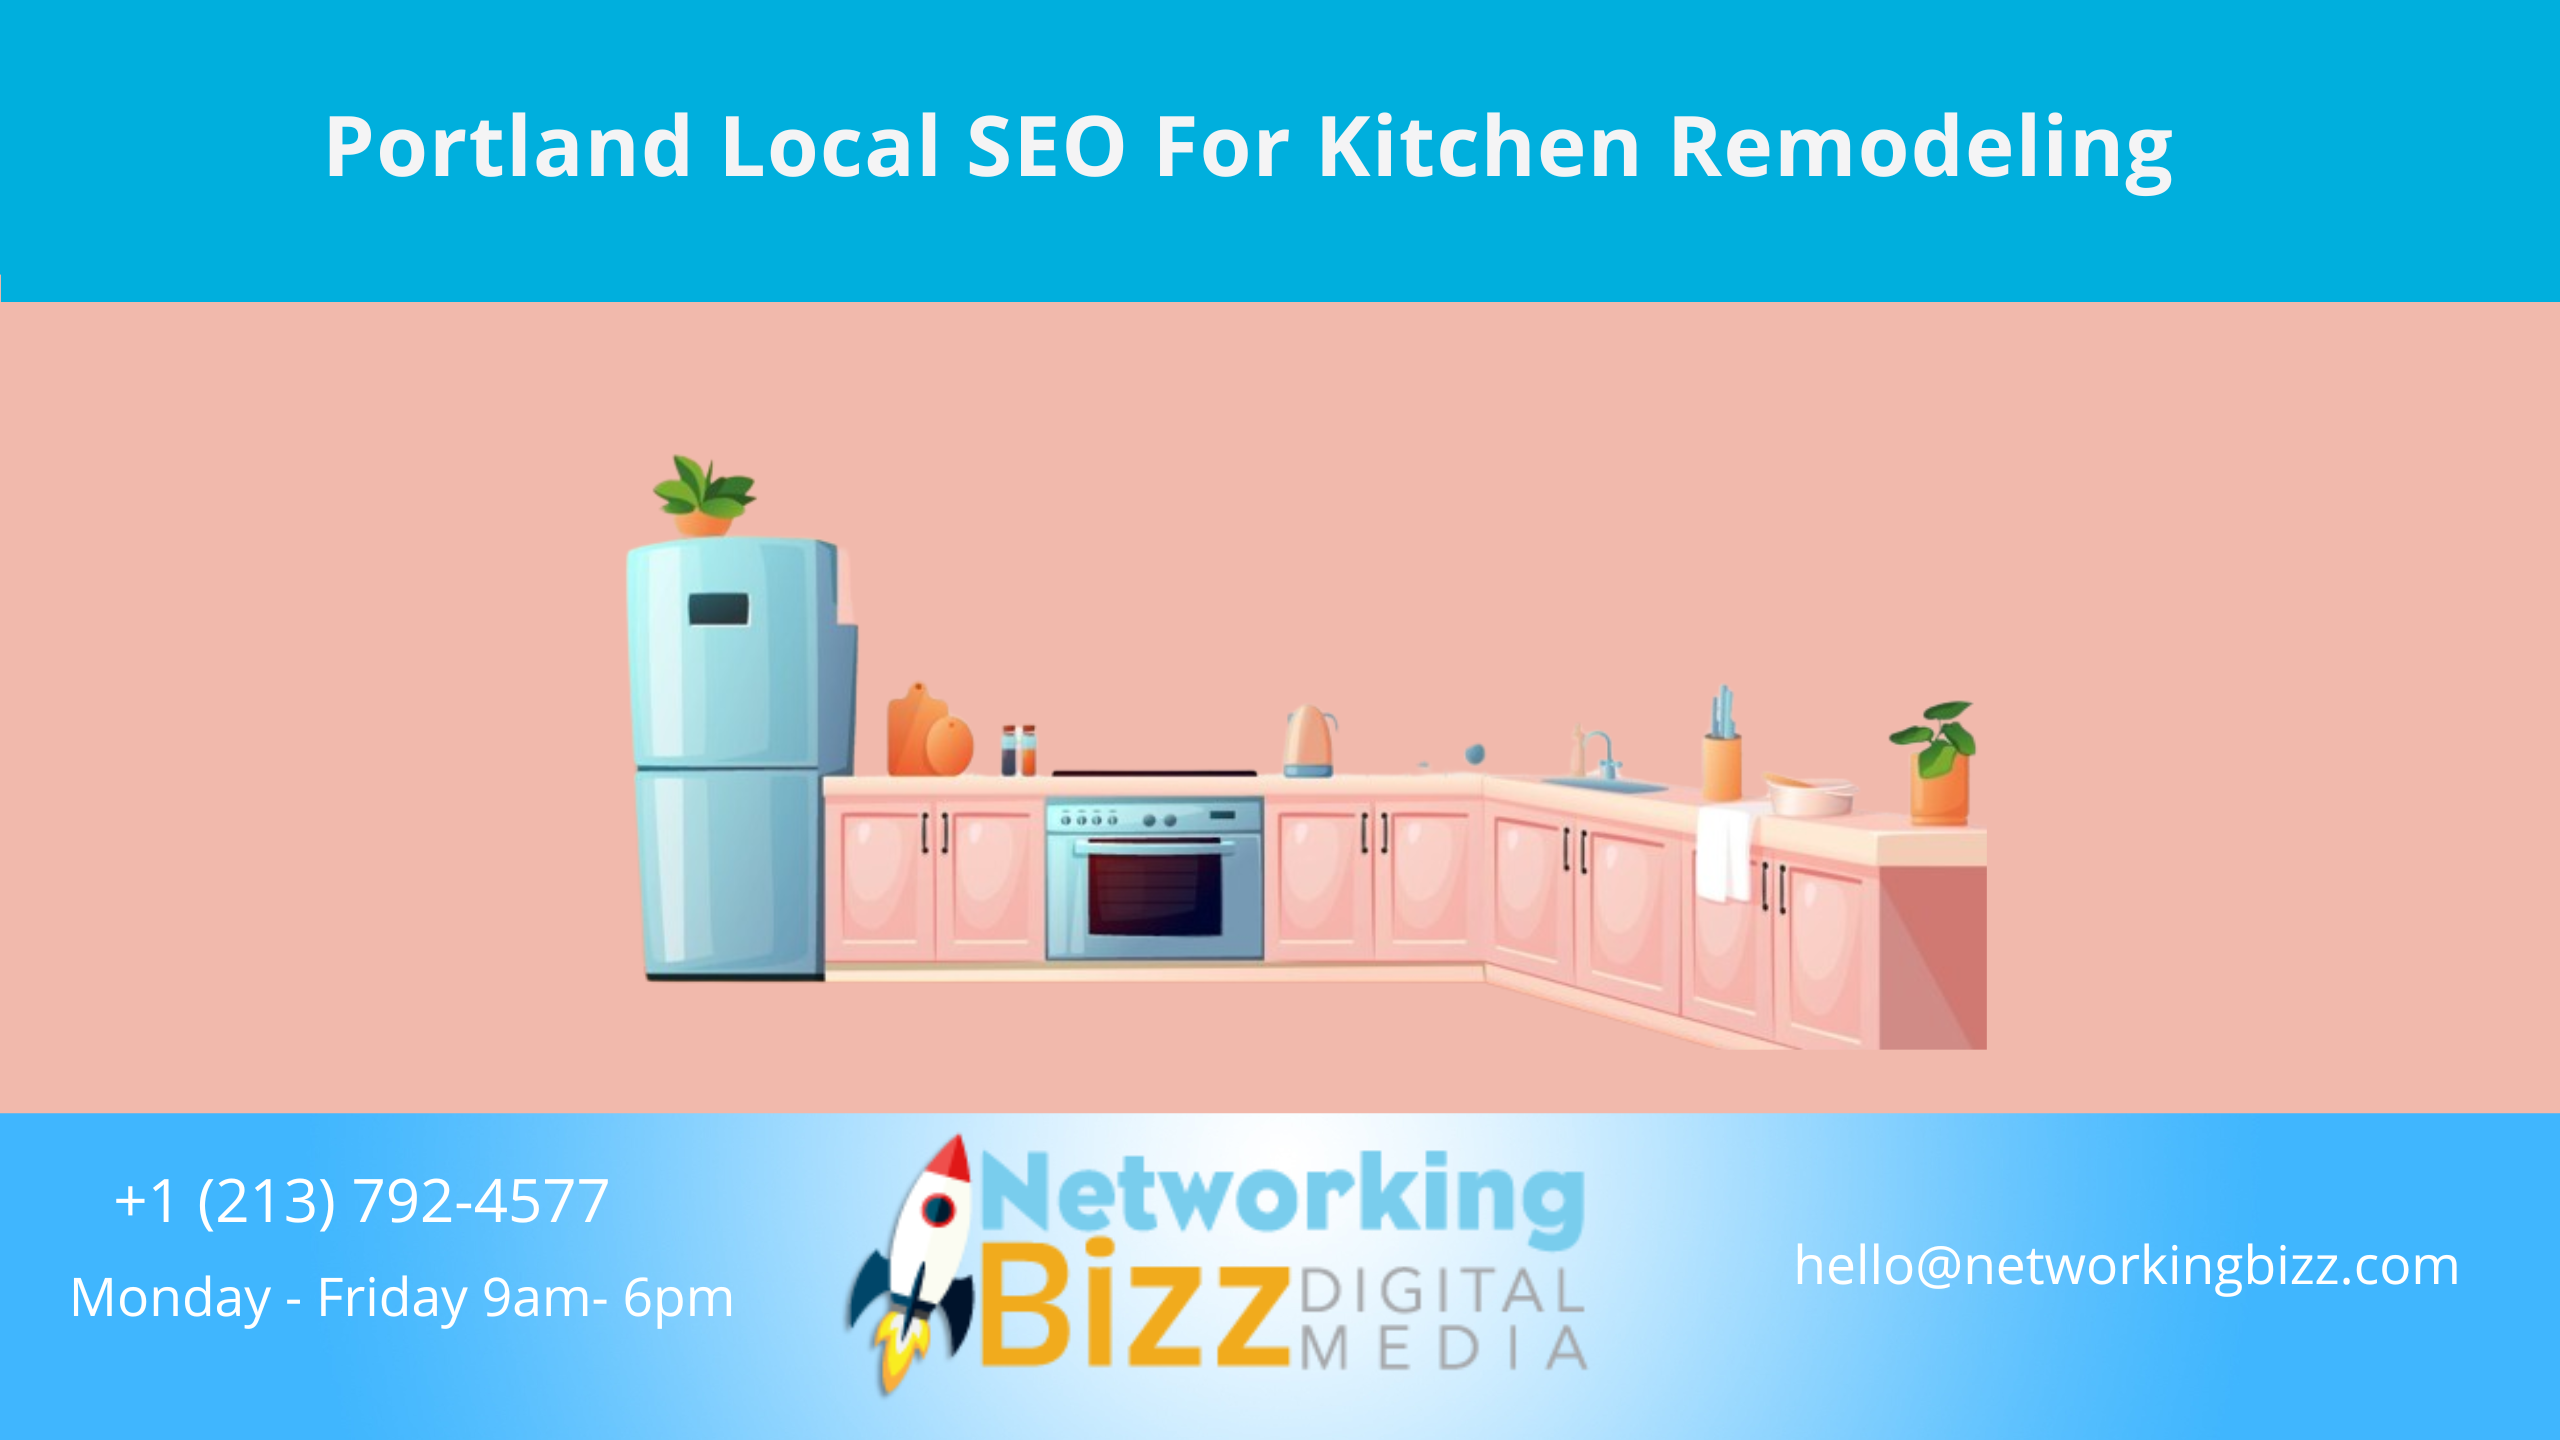 Portland Local SEO For Kitchen Remodeling